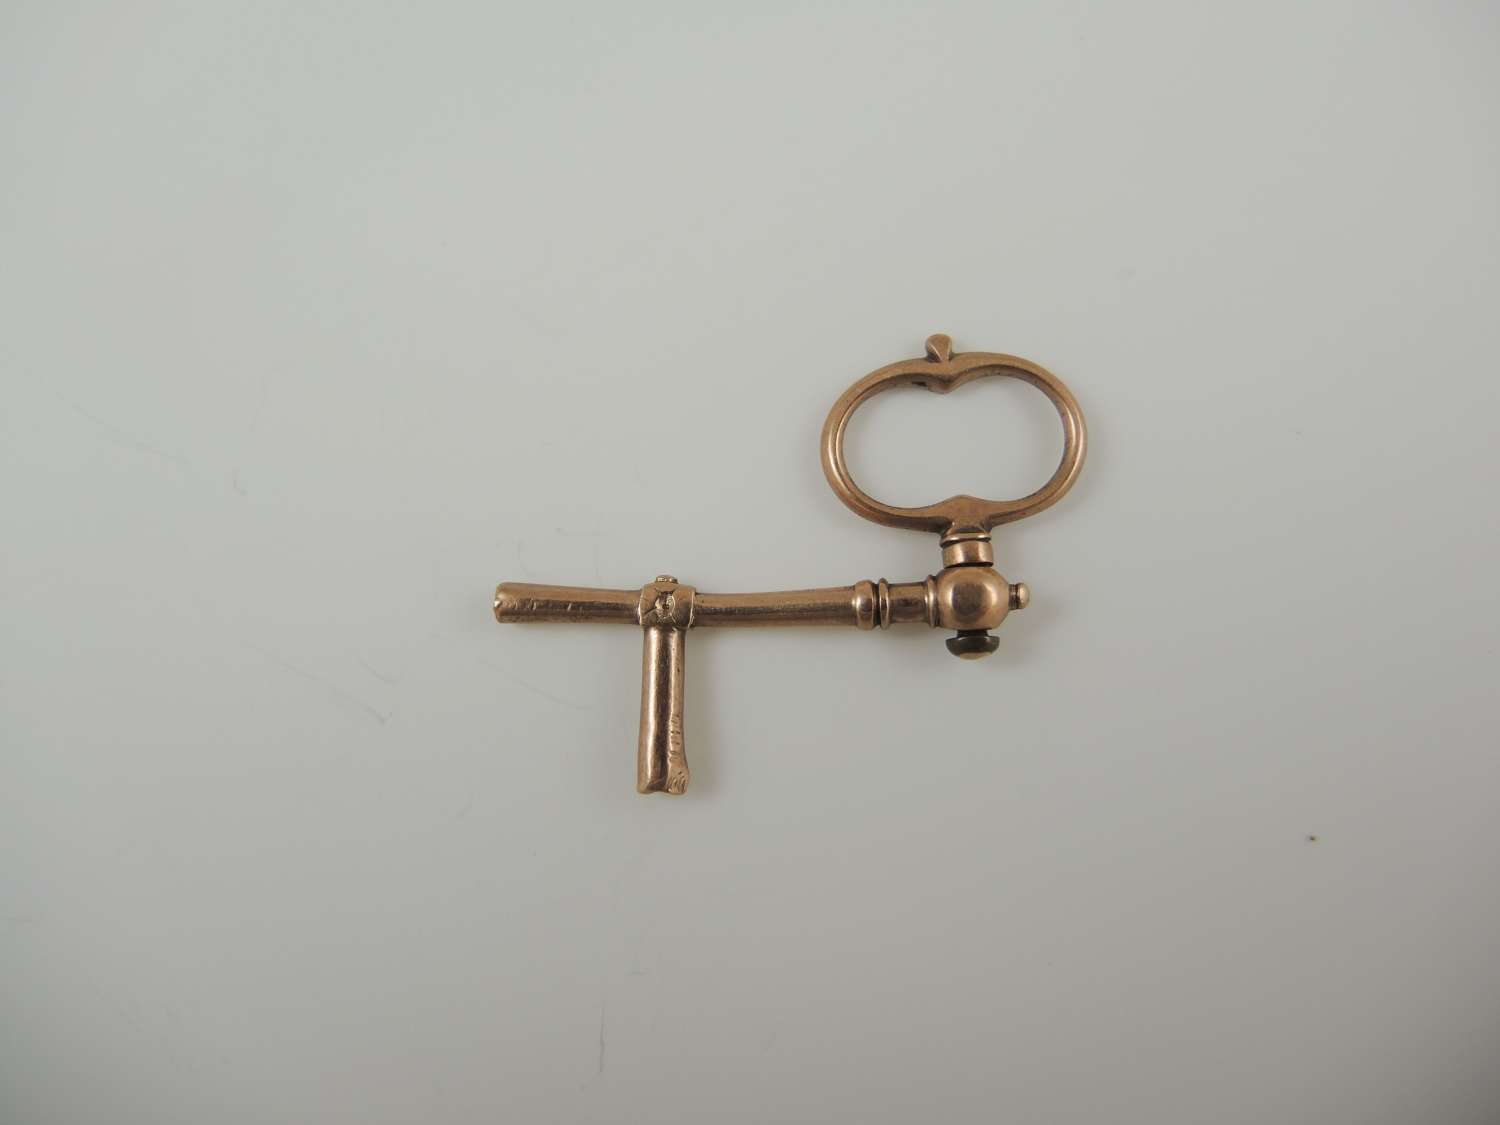 Gold Early double ended Crank pocket watch Key c1750